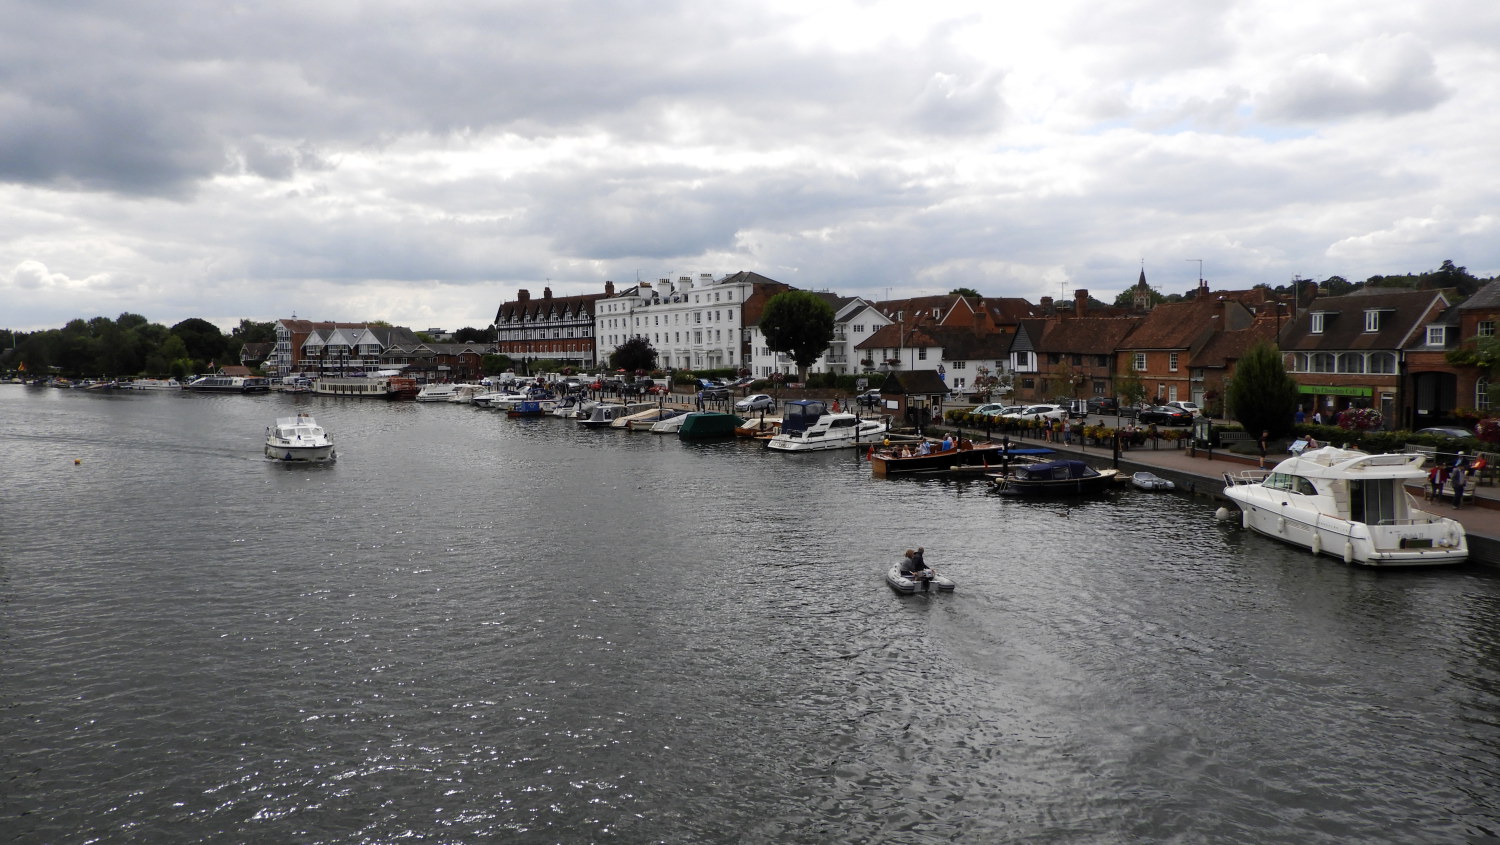 The view from Henley Bridge